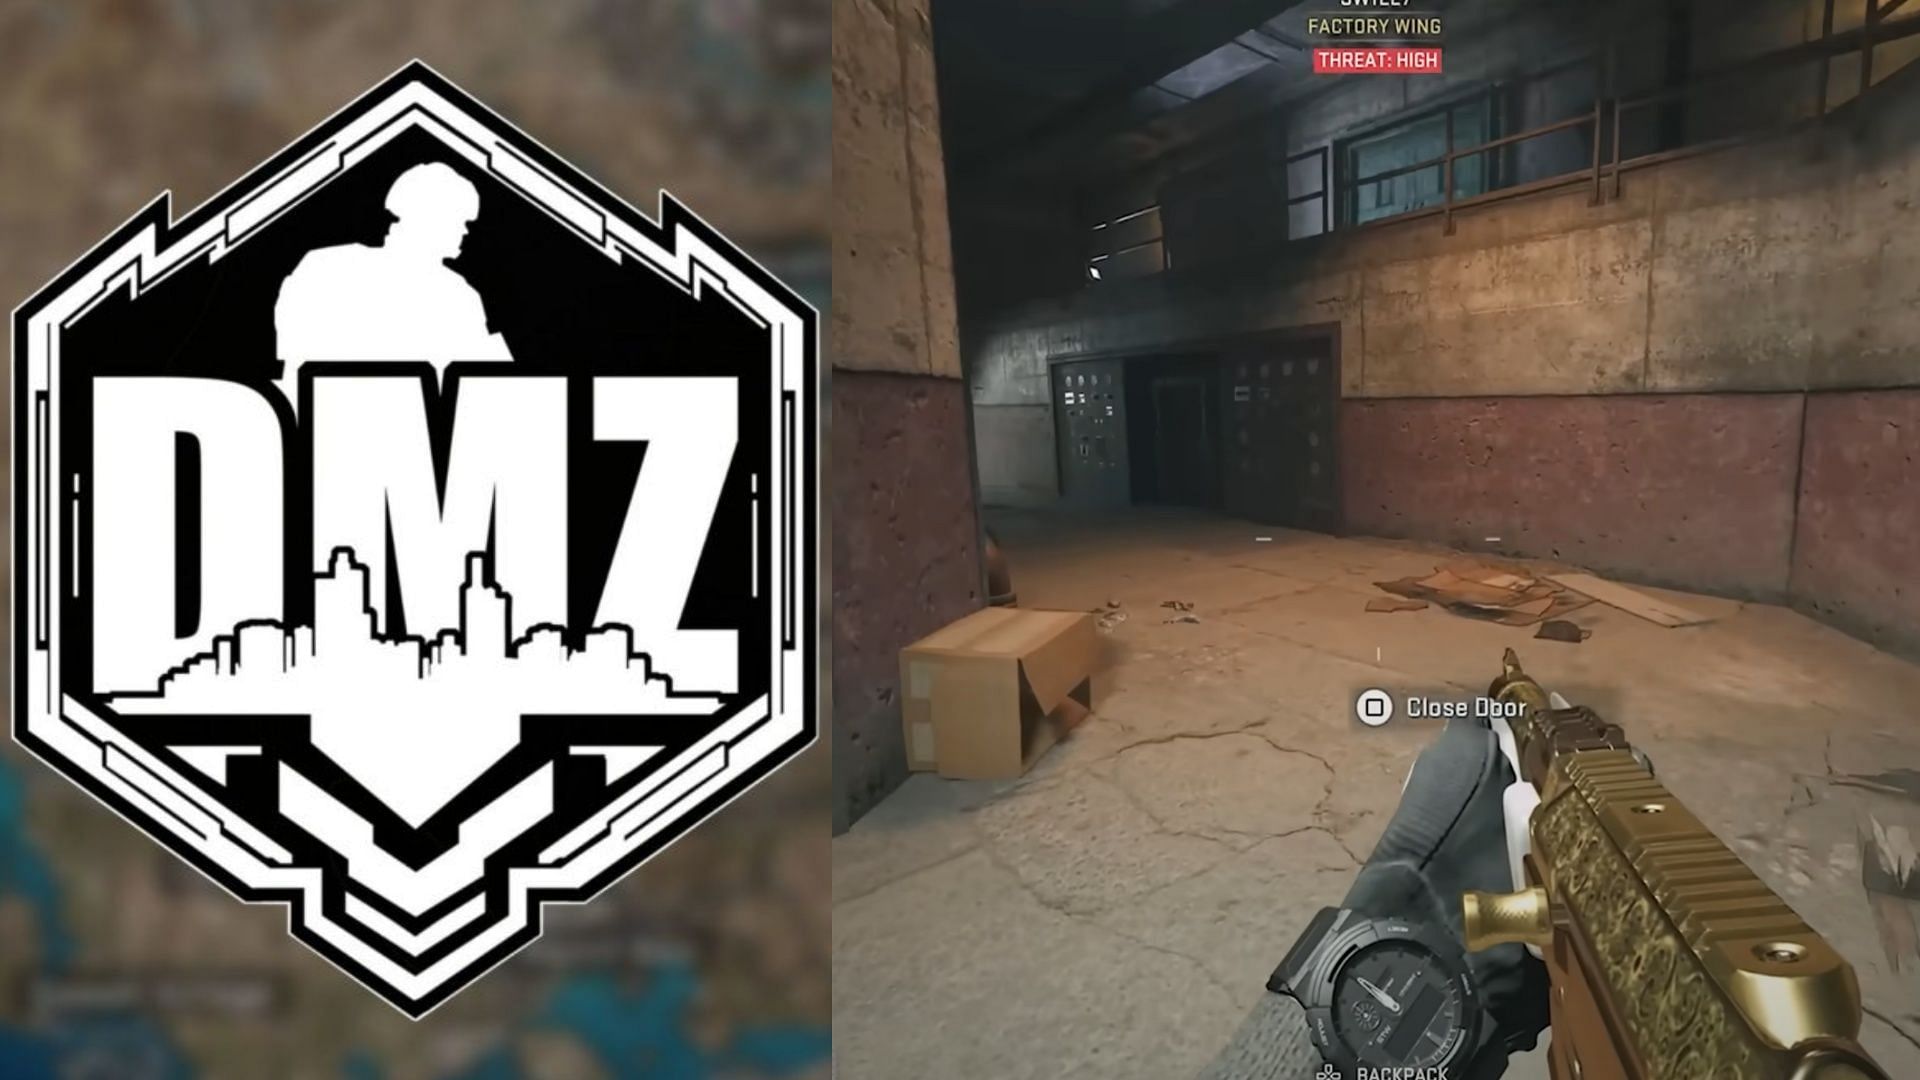 How to access the Factory Wing in Warzone 2 DMZ